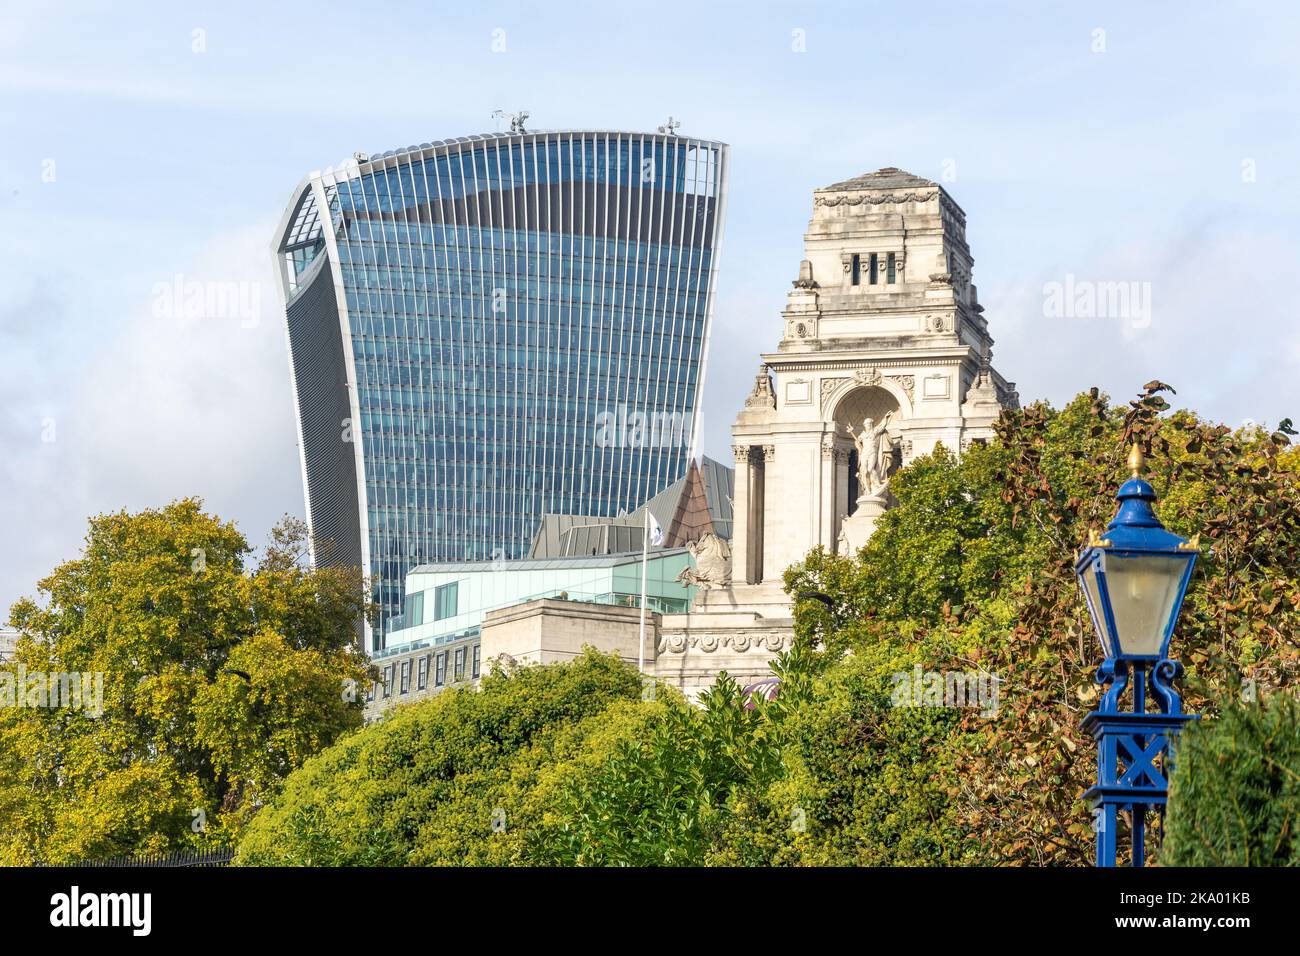 20 Fenchurch Street (Walkie-Talkie) building and Four Seasons Hotel, London Borough of Tower Hamlets, Greater London, England, United Kingdom Stock Photo